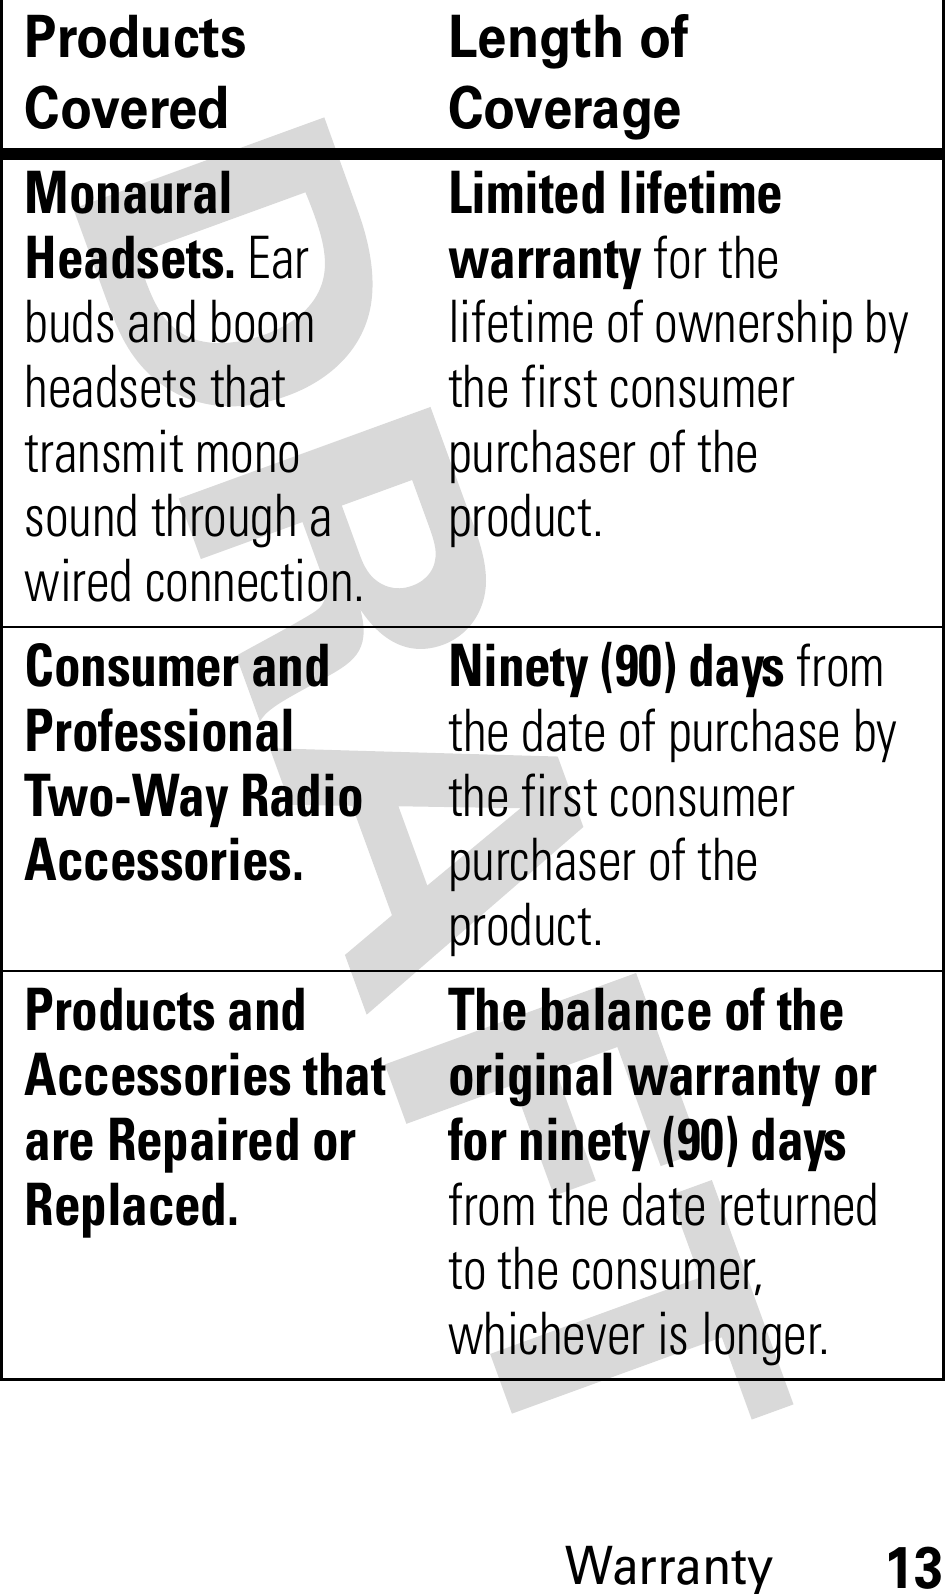 Warranty13Monaural Headsets. Ear buds and boom headsets that transmit mono sound through a wired connection.Limited lifetime warranty for the lifetime of ownership by the first consumer purchaser of the product.Consumer and ProfessionalTwo-Way Radio Accessories. Ninety (90) days from the date of purchase by the first consumer purchaser of the product.Products and Accessories that are Repaired or Replaced. The balance of the original warranty or for ninety (90) days from the date returned to the consumer, whichever is longer.Products CoveredLength of Coverage